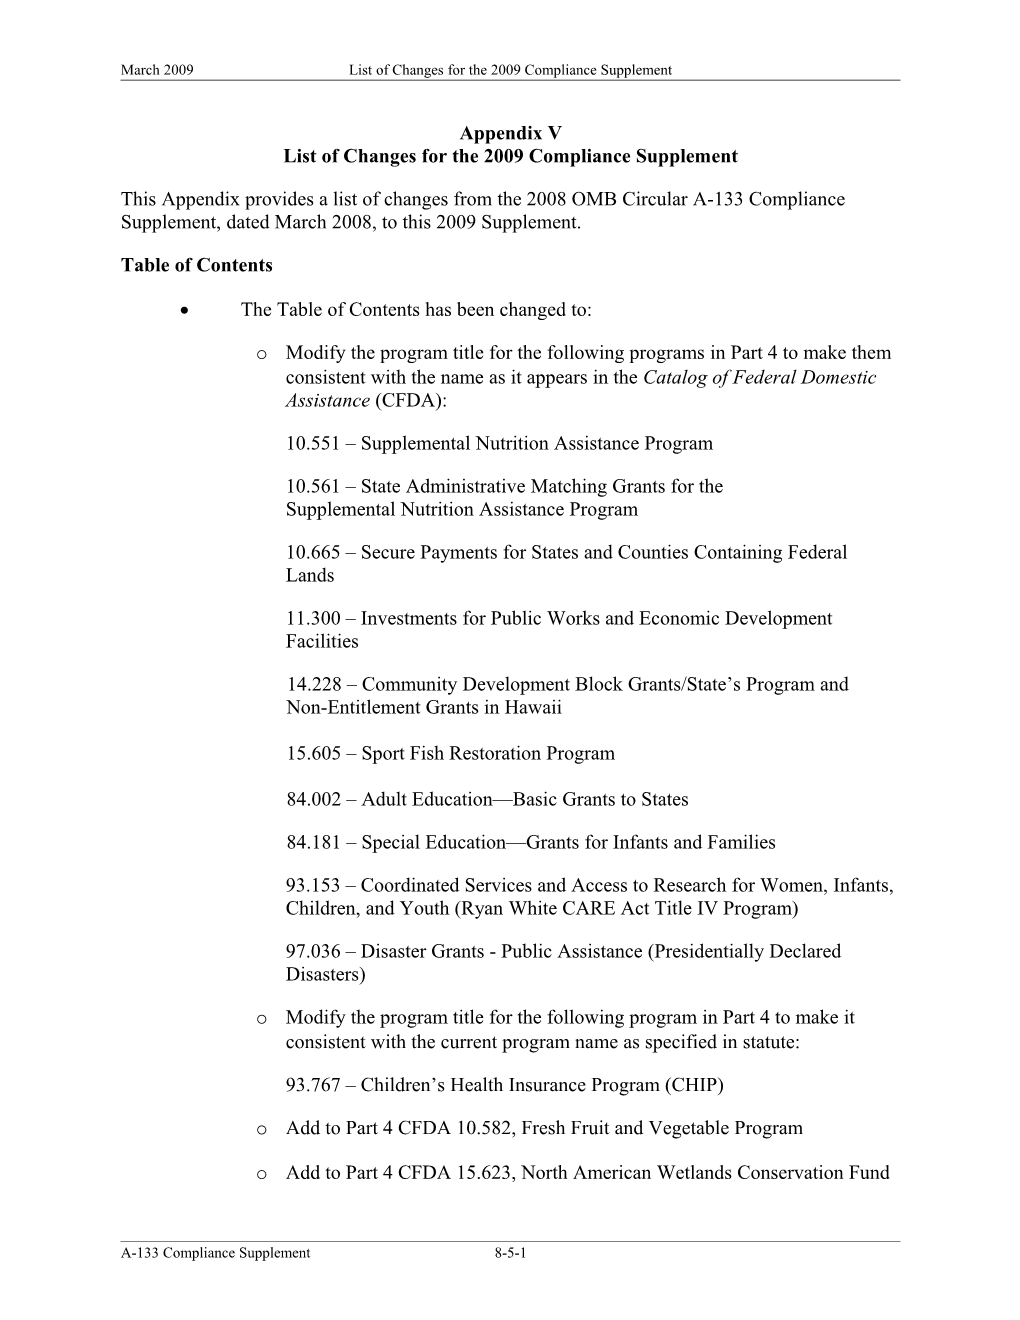 List of Changes for the 2009Compliance Supplement